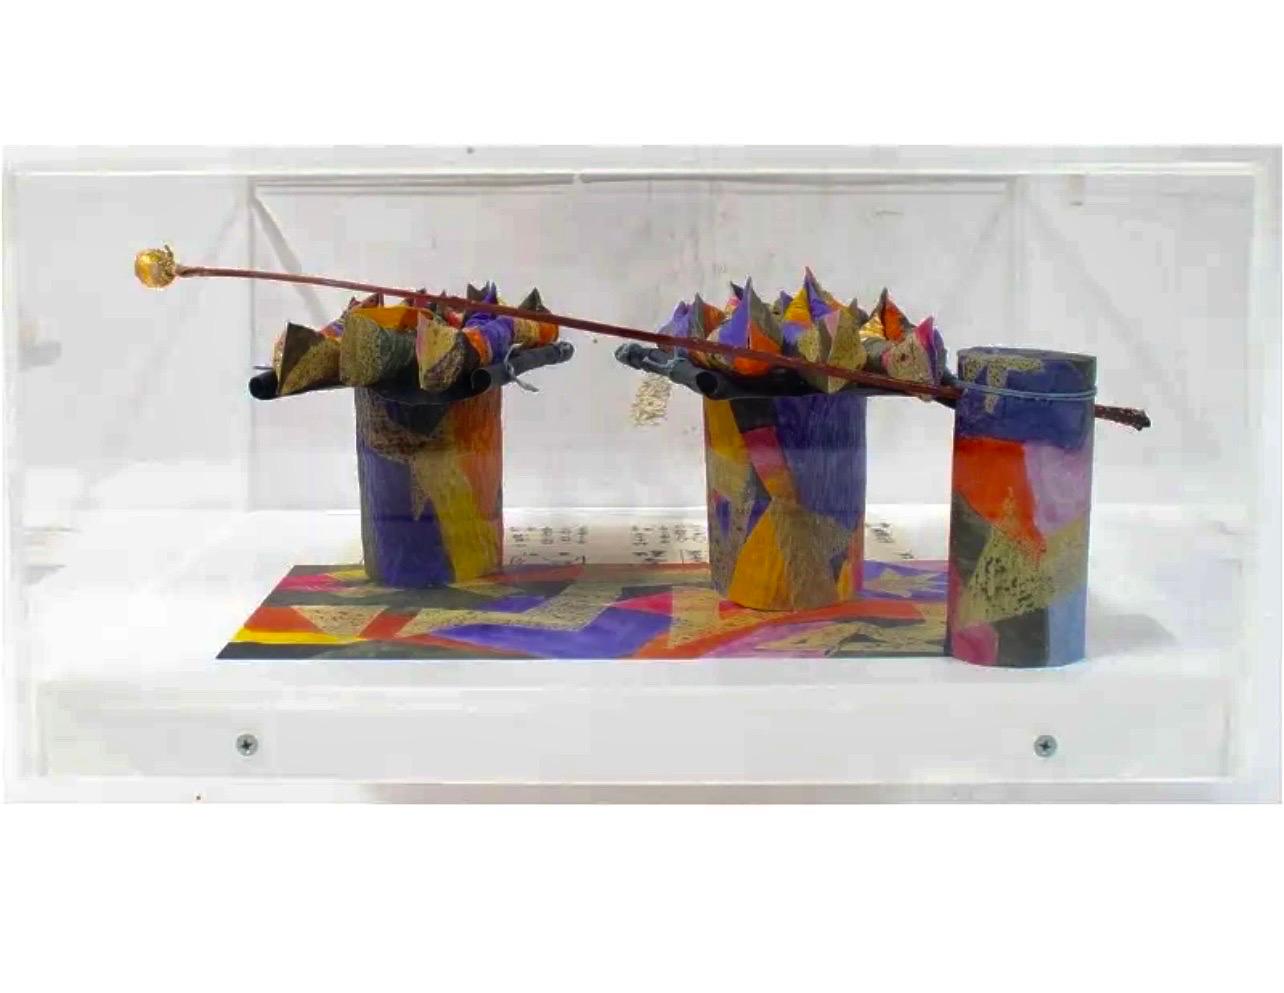 Akiko Sugiyama Japanese Calligraphy Painting Collage, 3D Shadow Box Sculpture For Sale 2